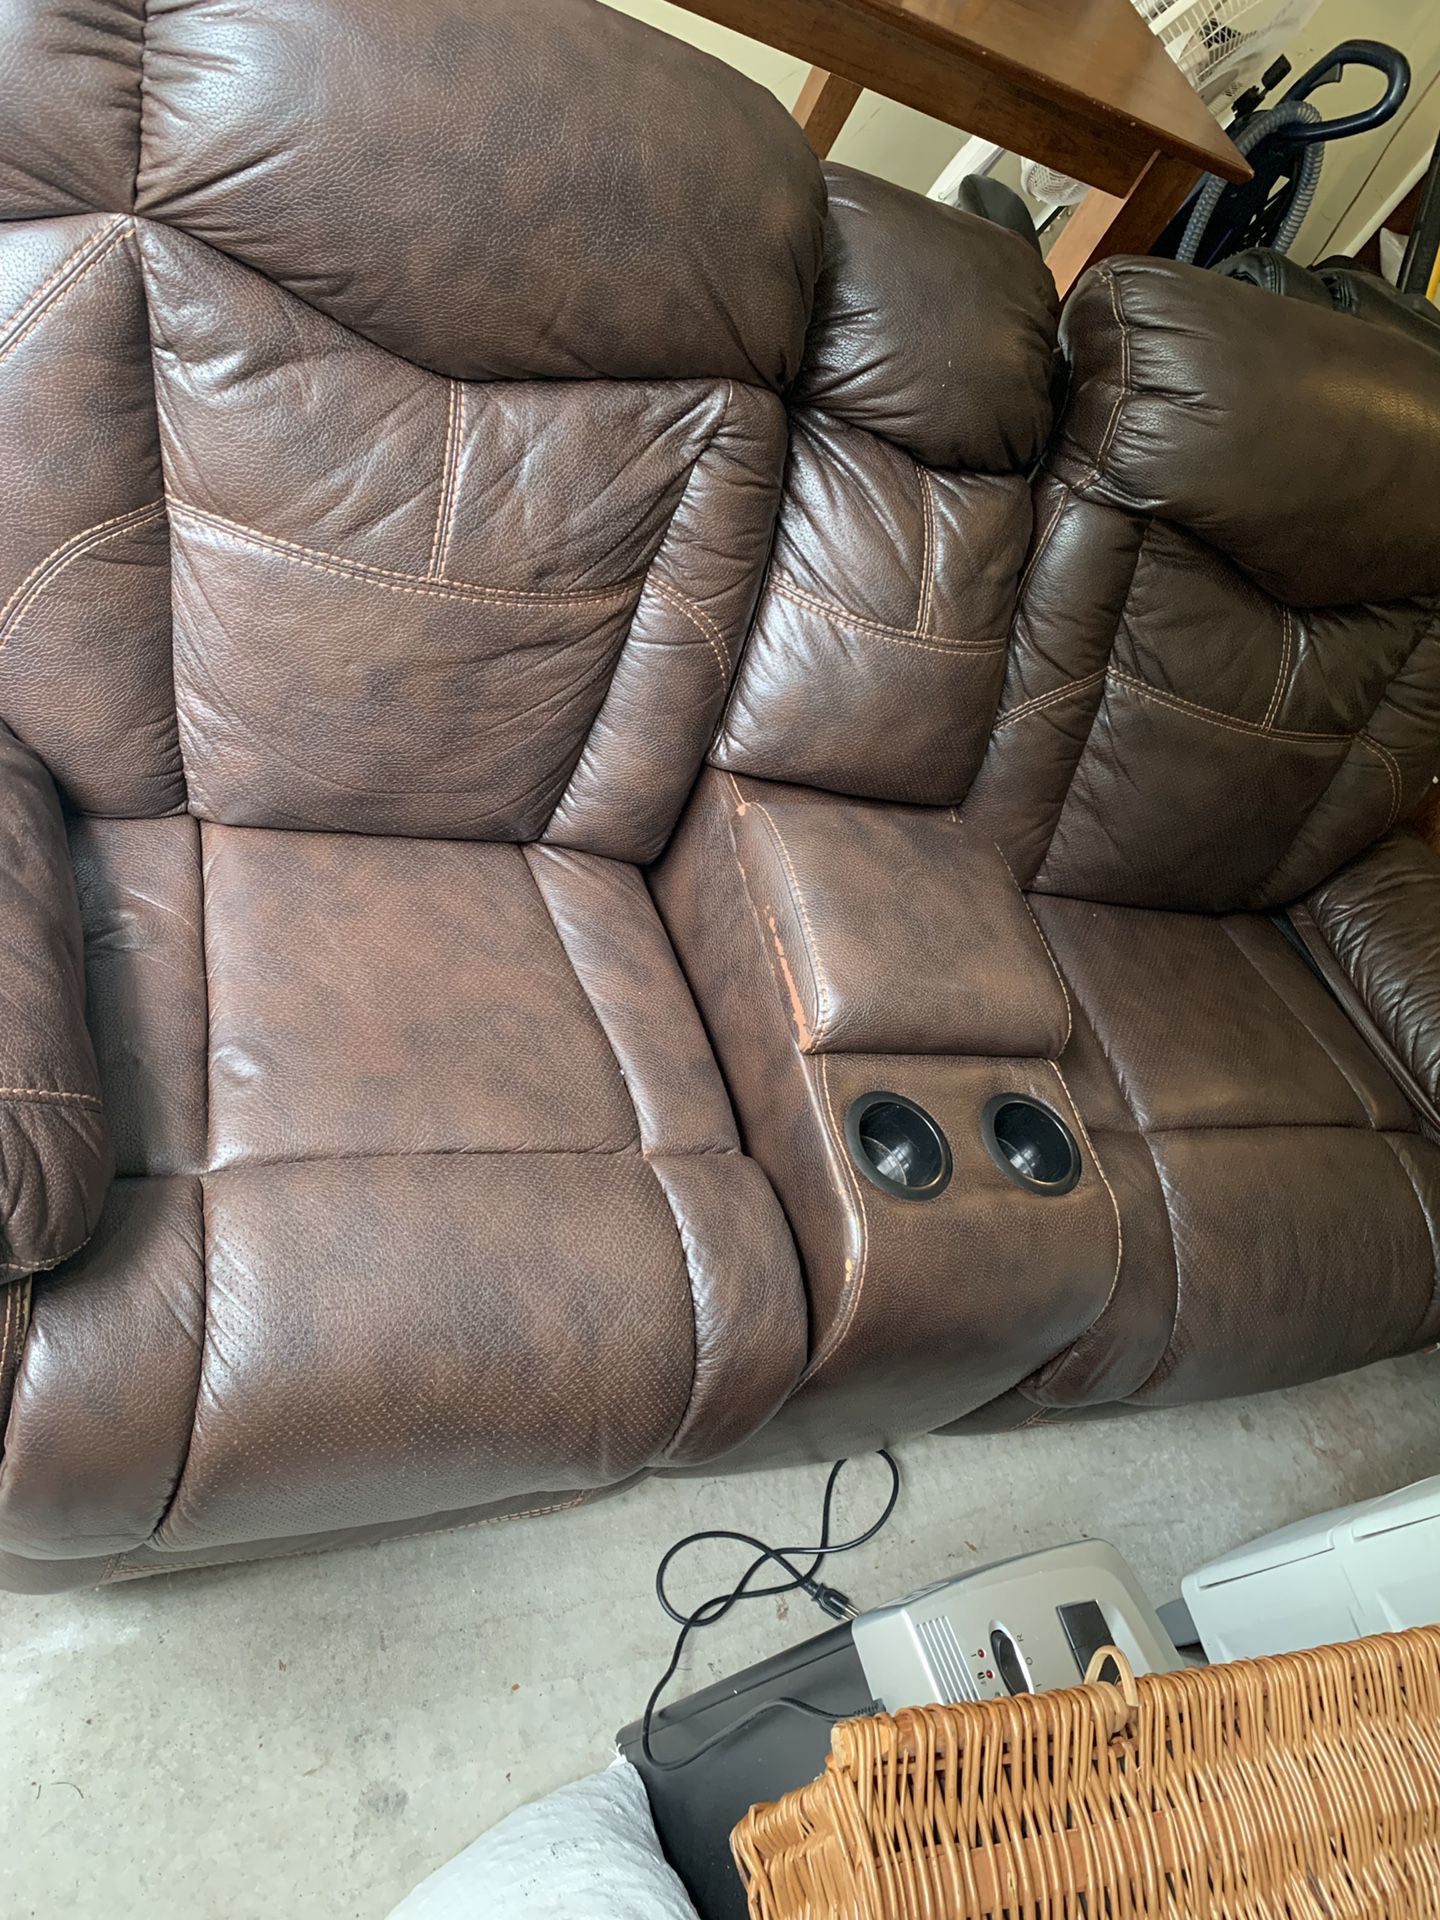 FREE leather couch love seat.